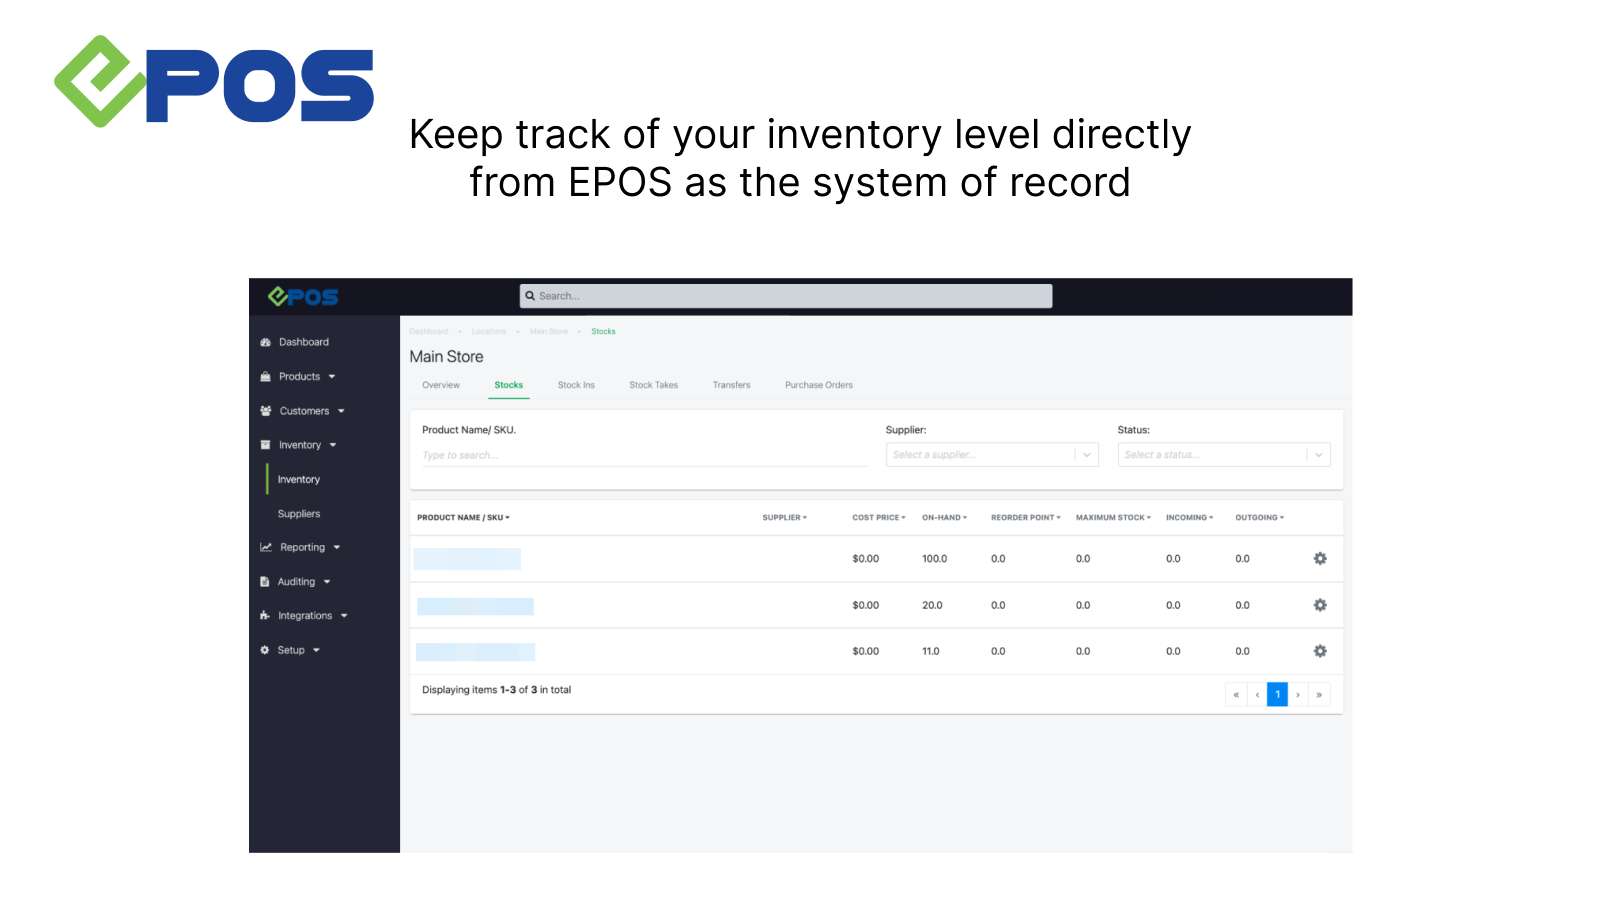 Keep track of your inventory level directly from EPOS